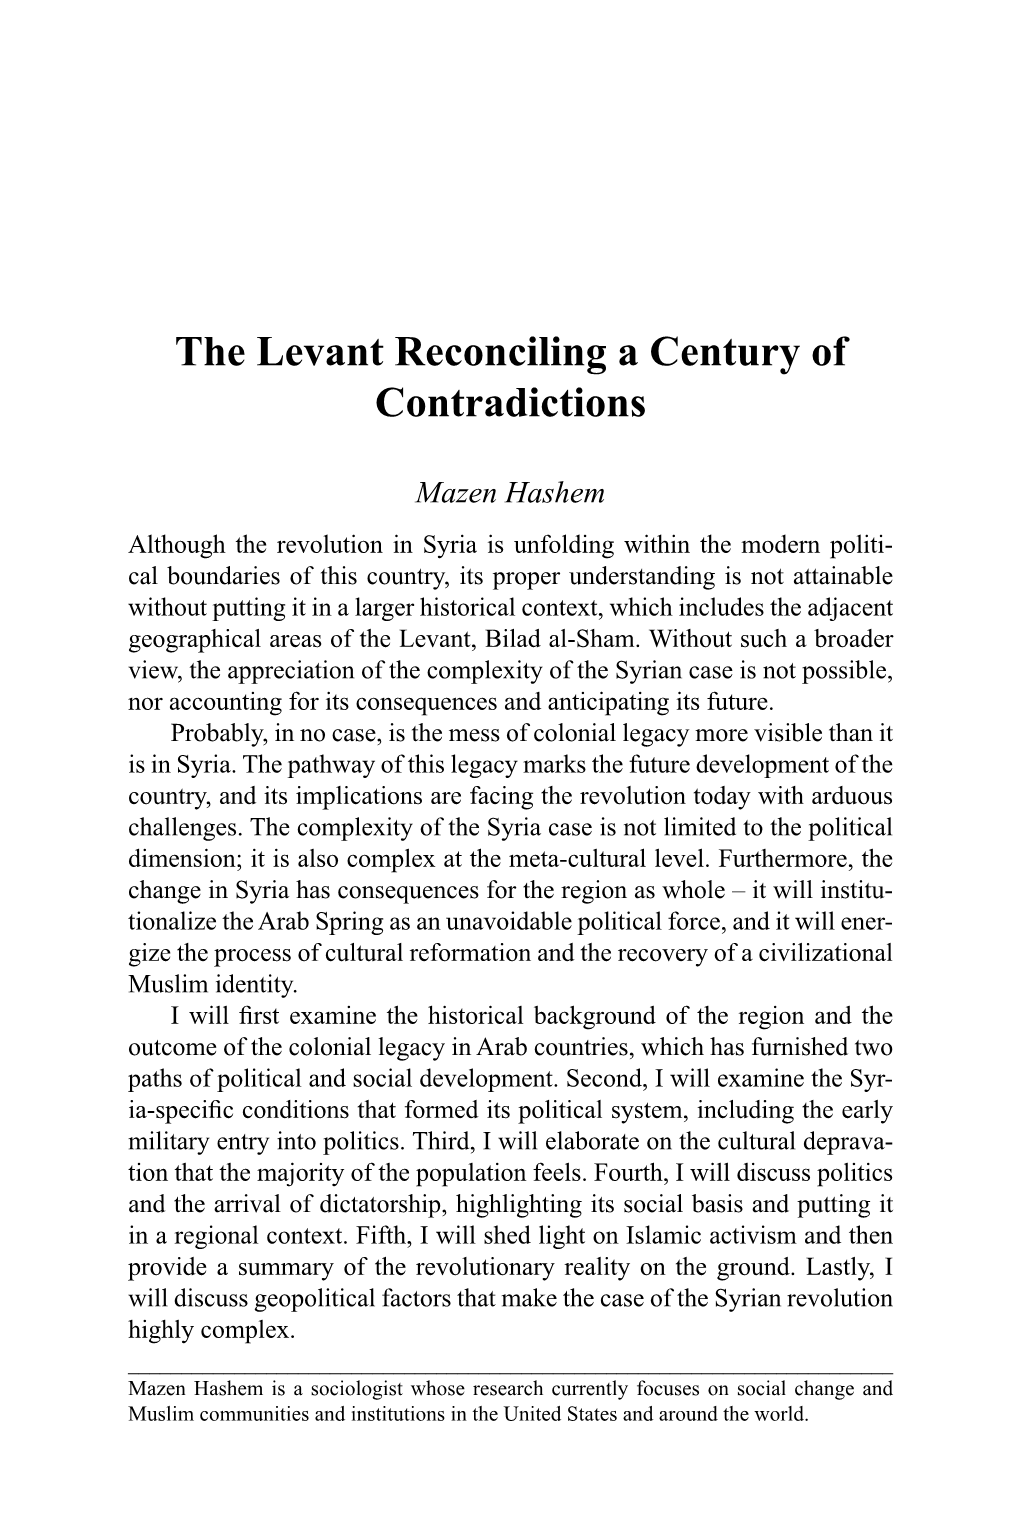 The Levant Reconciling a Century of Contradictions